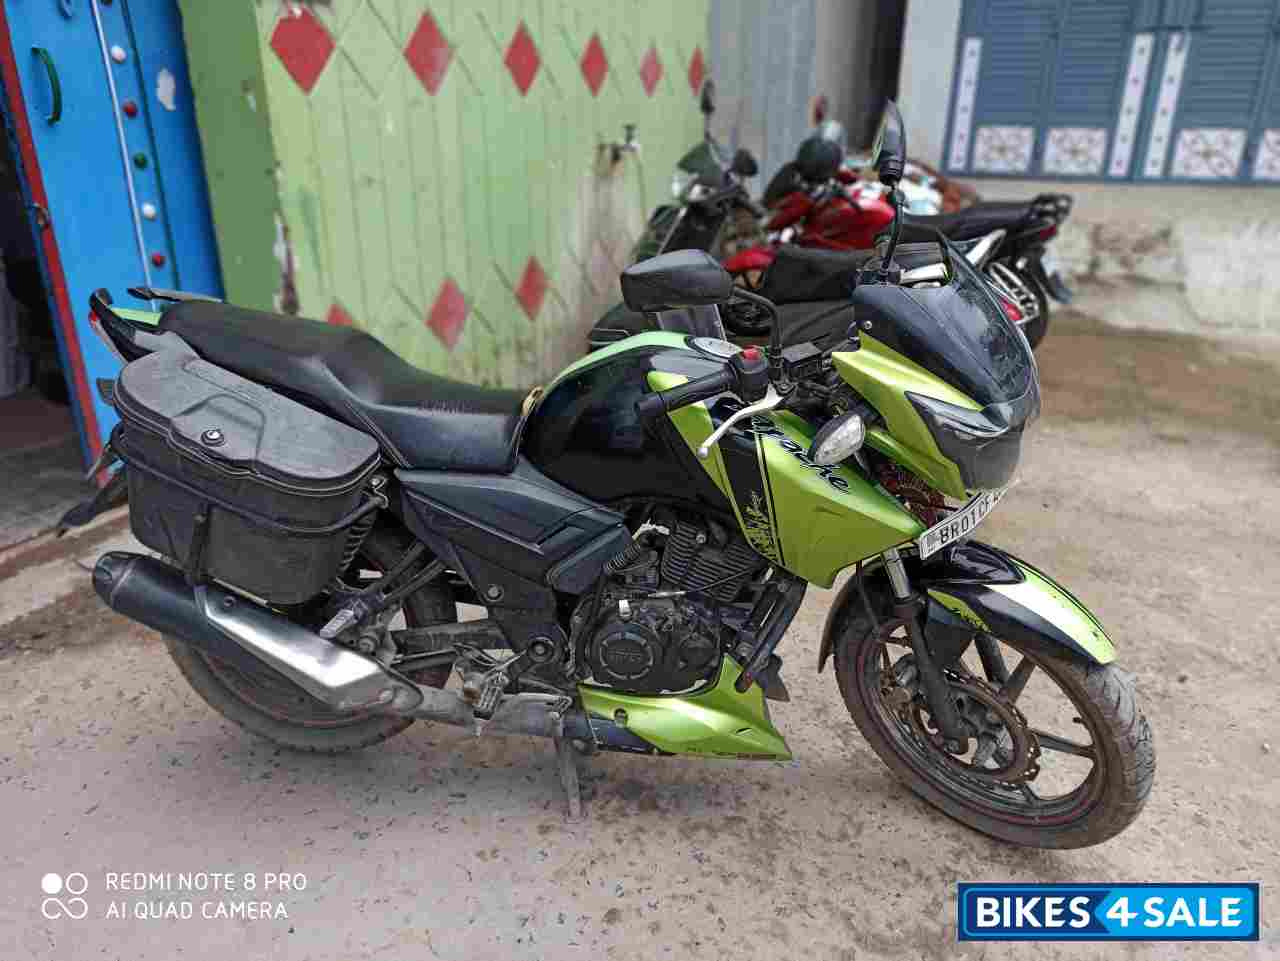 Used 14 Model Tvs Apache Rtr 160 For Sale In Patna Id Green Black Colour Bikes4sale